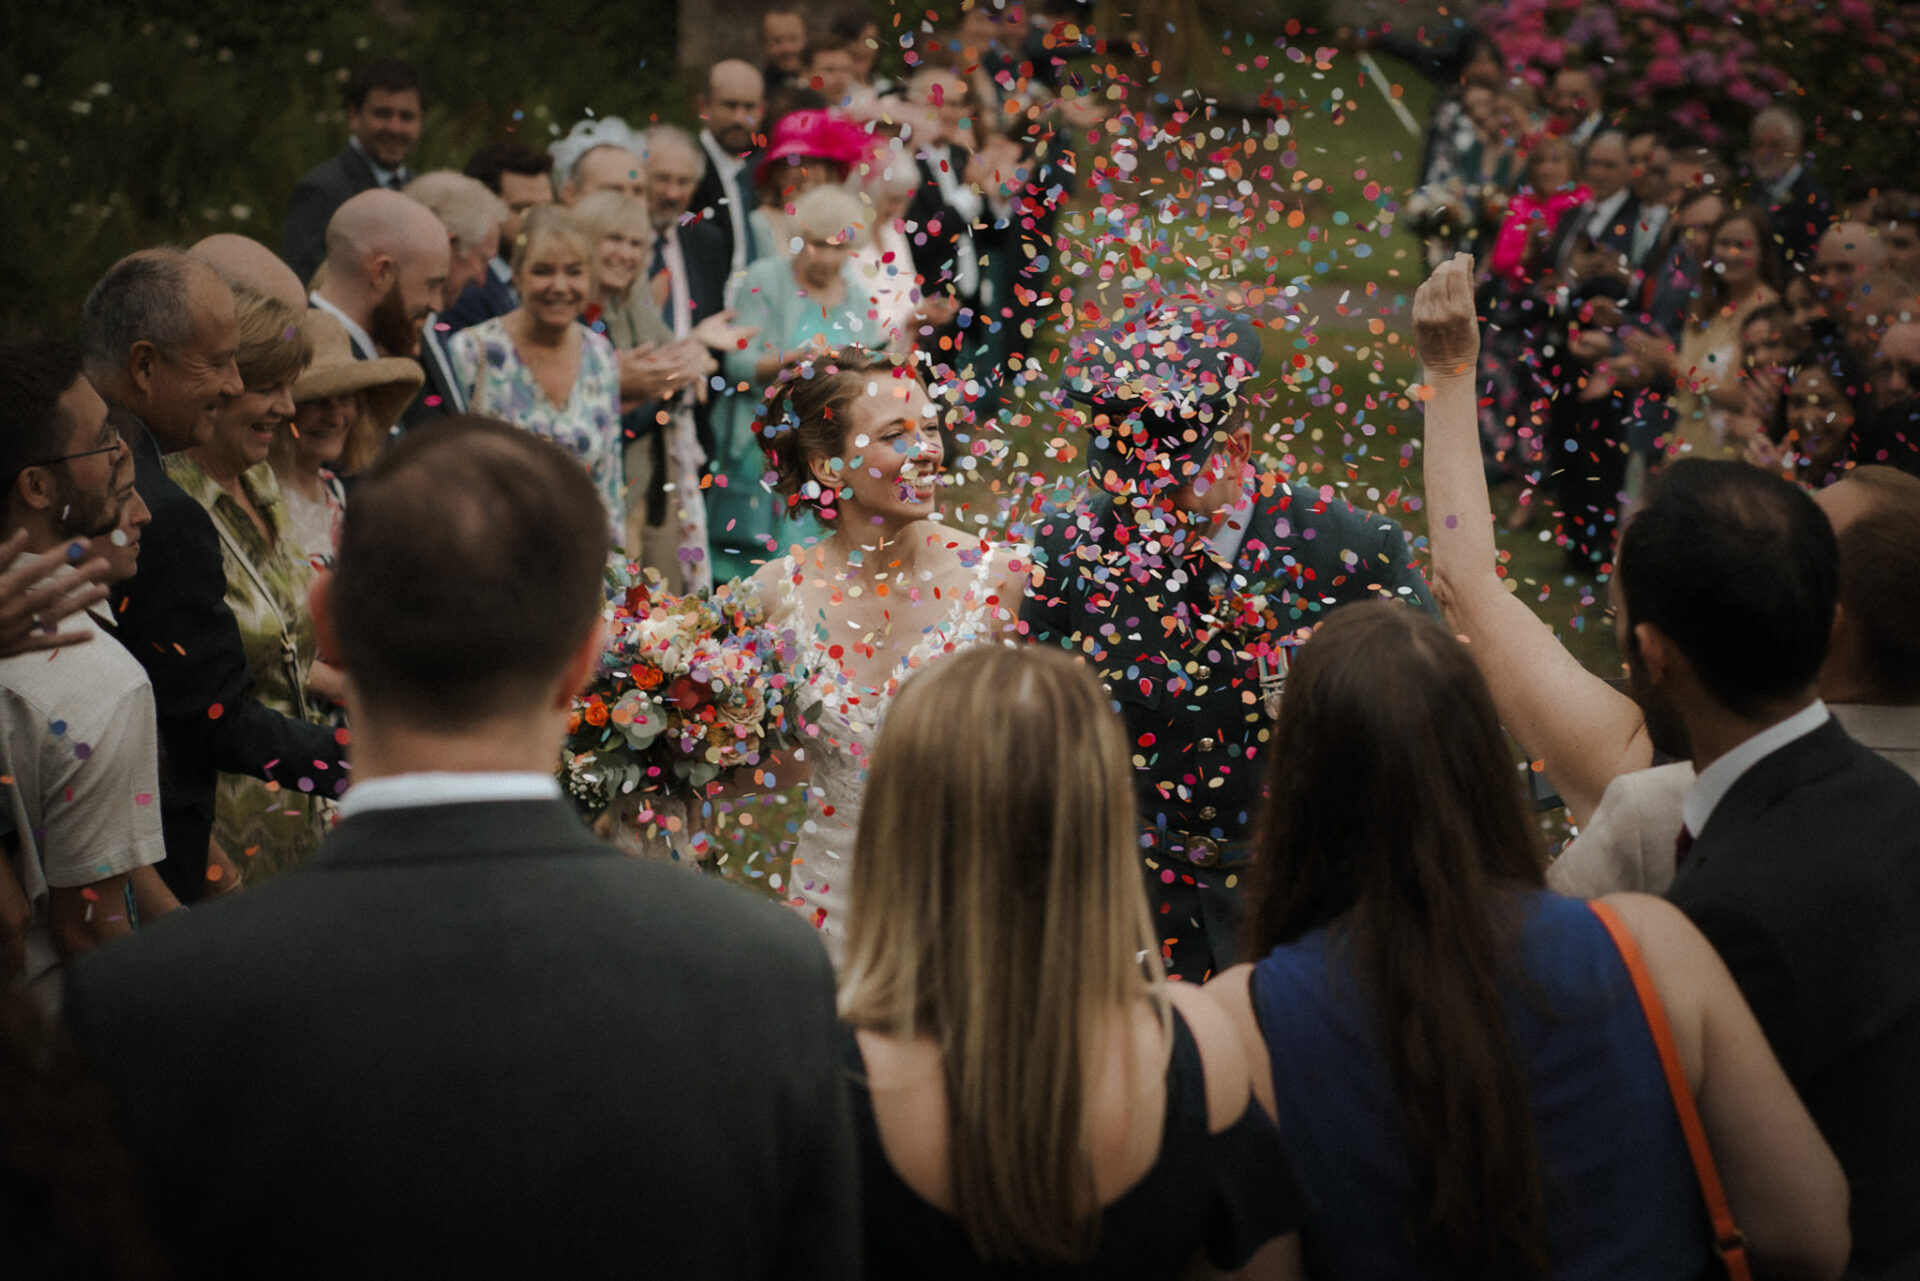 A bride and groom walk through a crowd as guests toss colorful confetti at a wedding celebration.